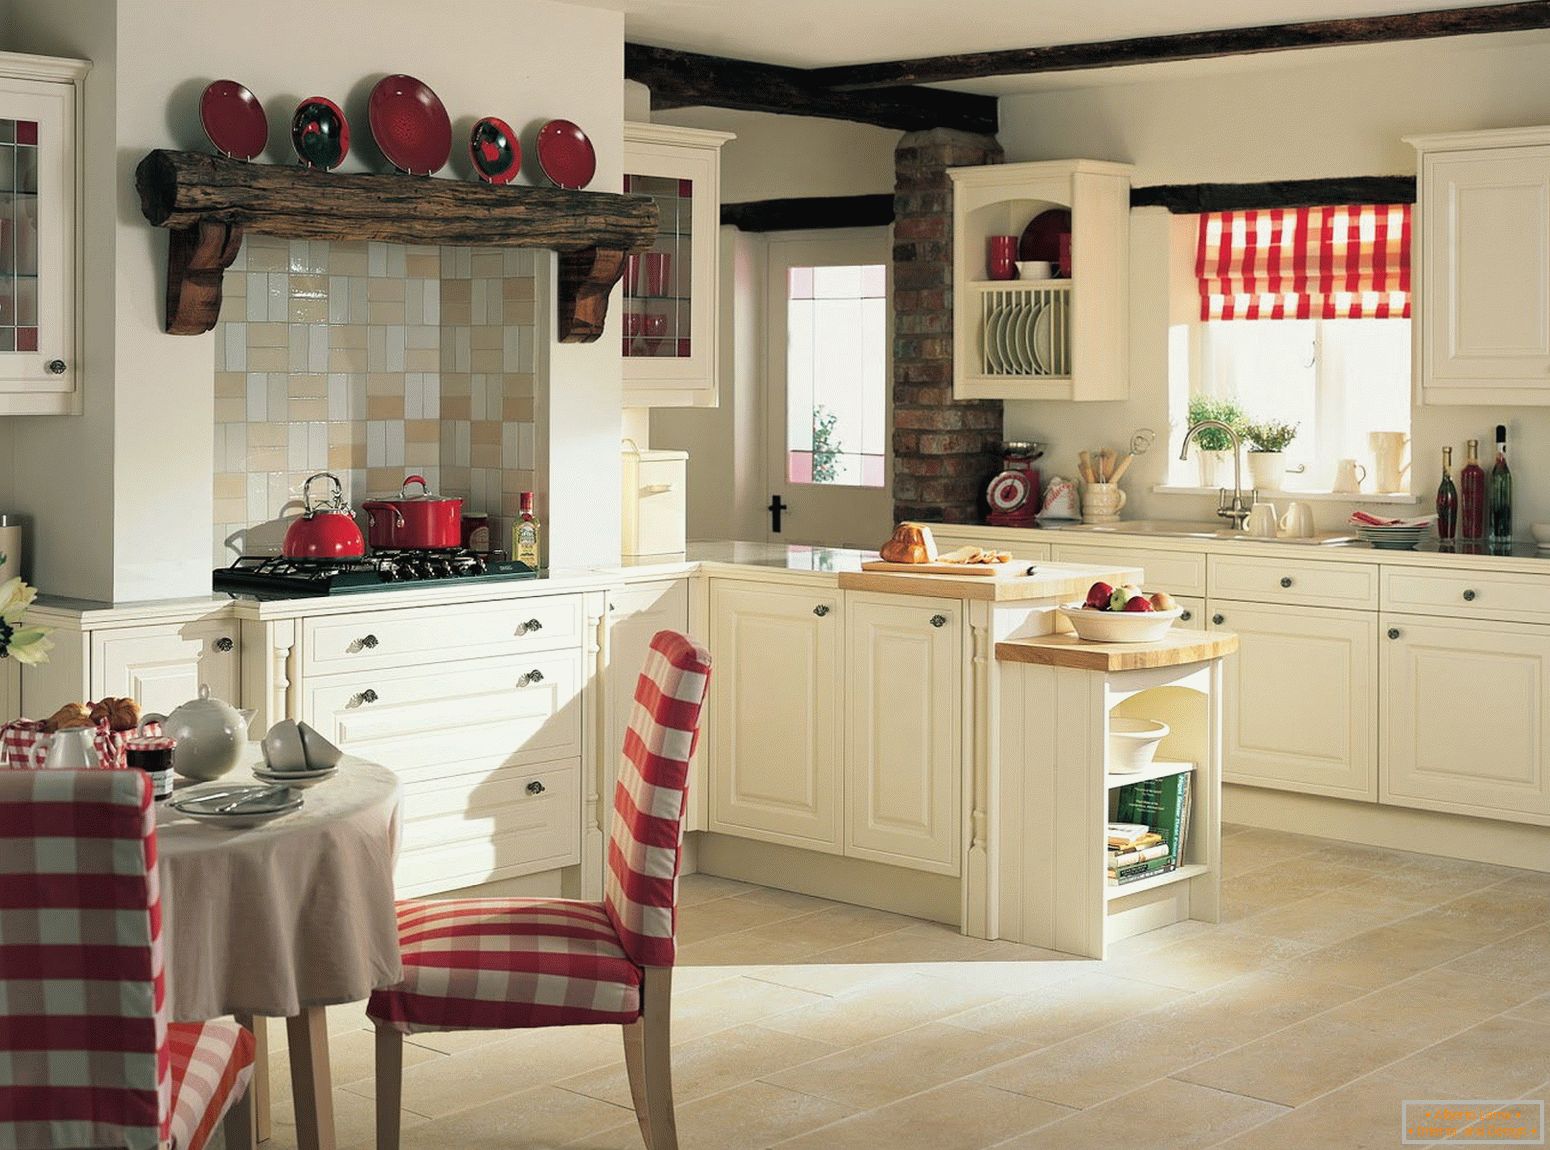 Finishing natural country kitchen materials